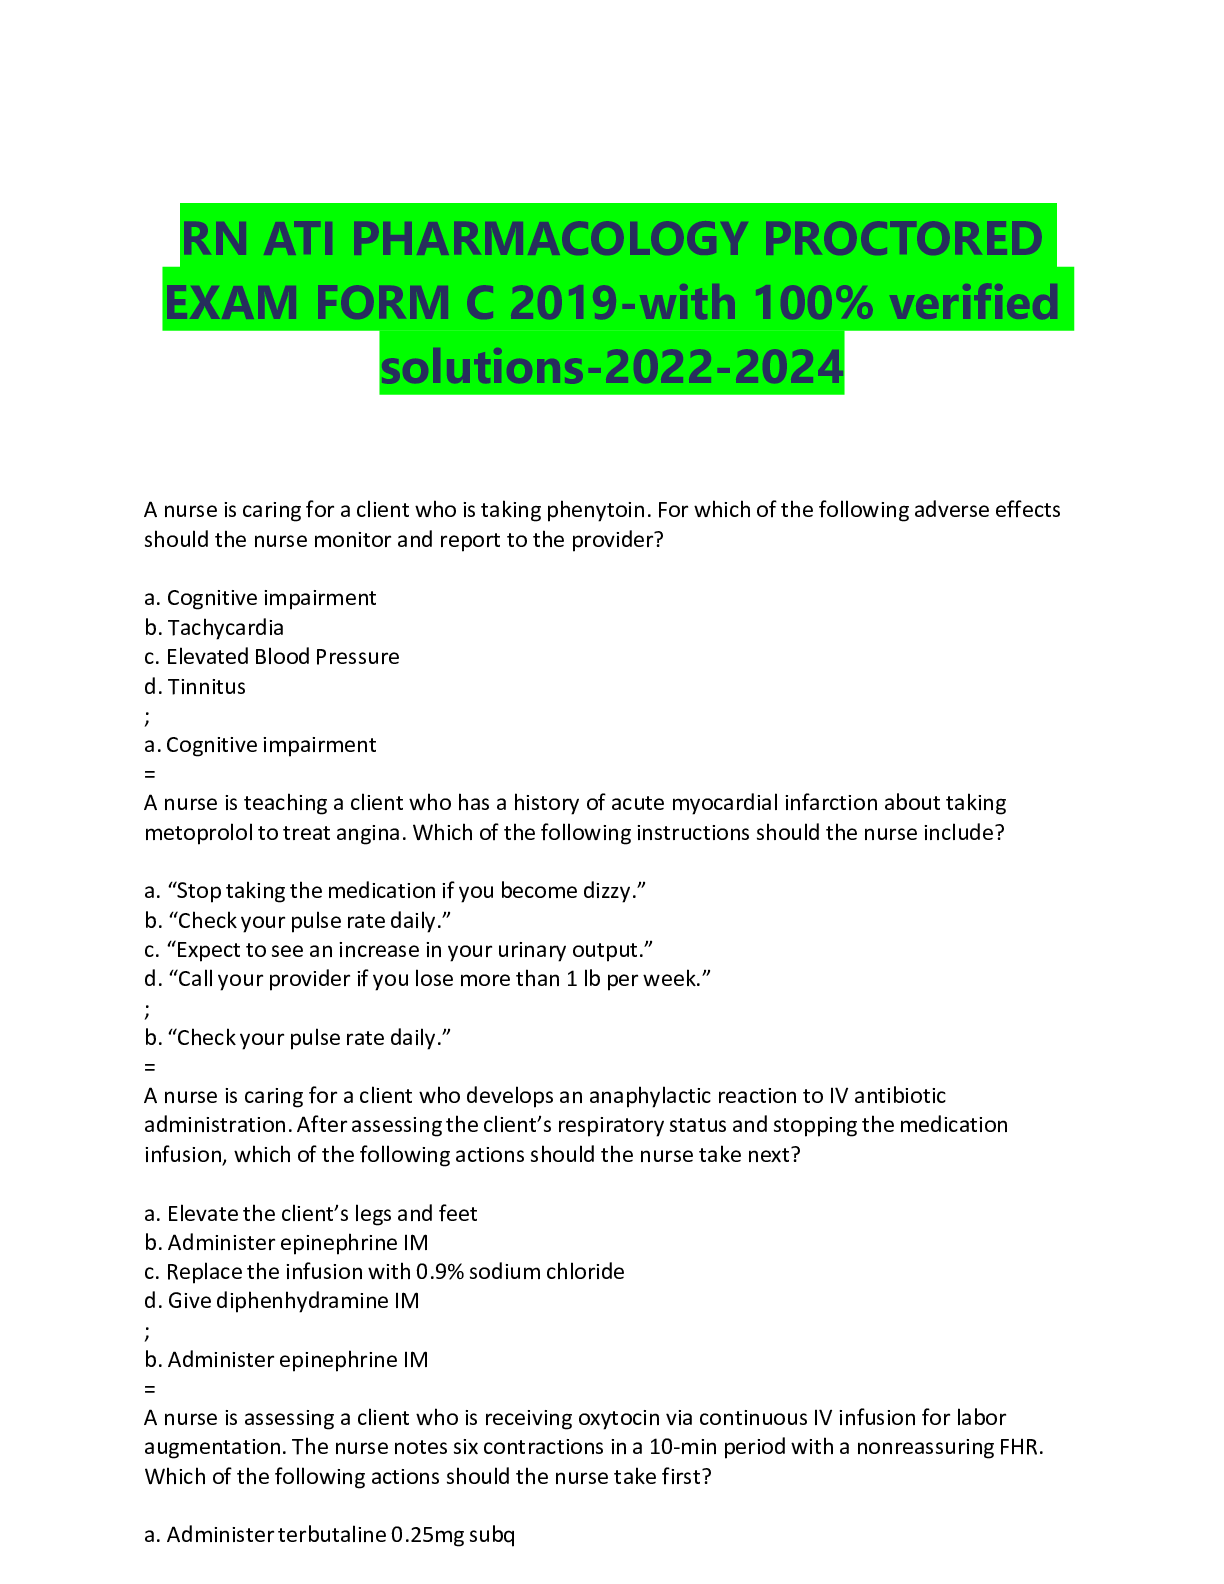 RN ATI PHARMACOLOGY PROCTORED EXAM FORM C 2019with 100 verified